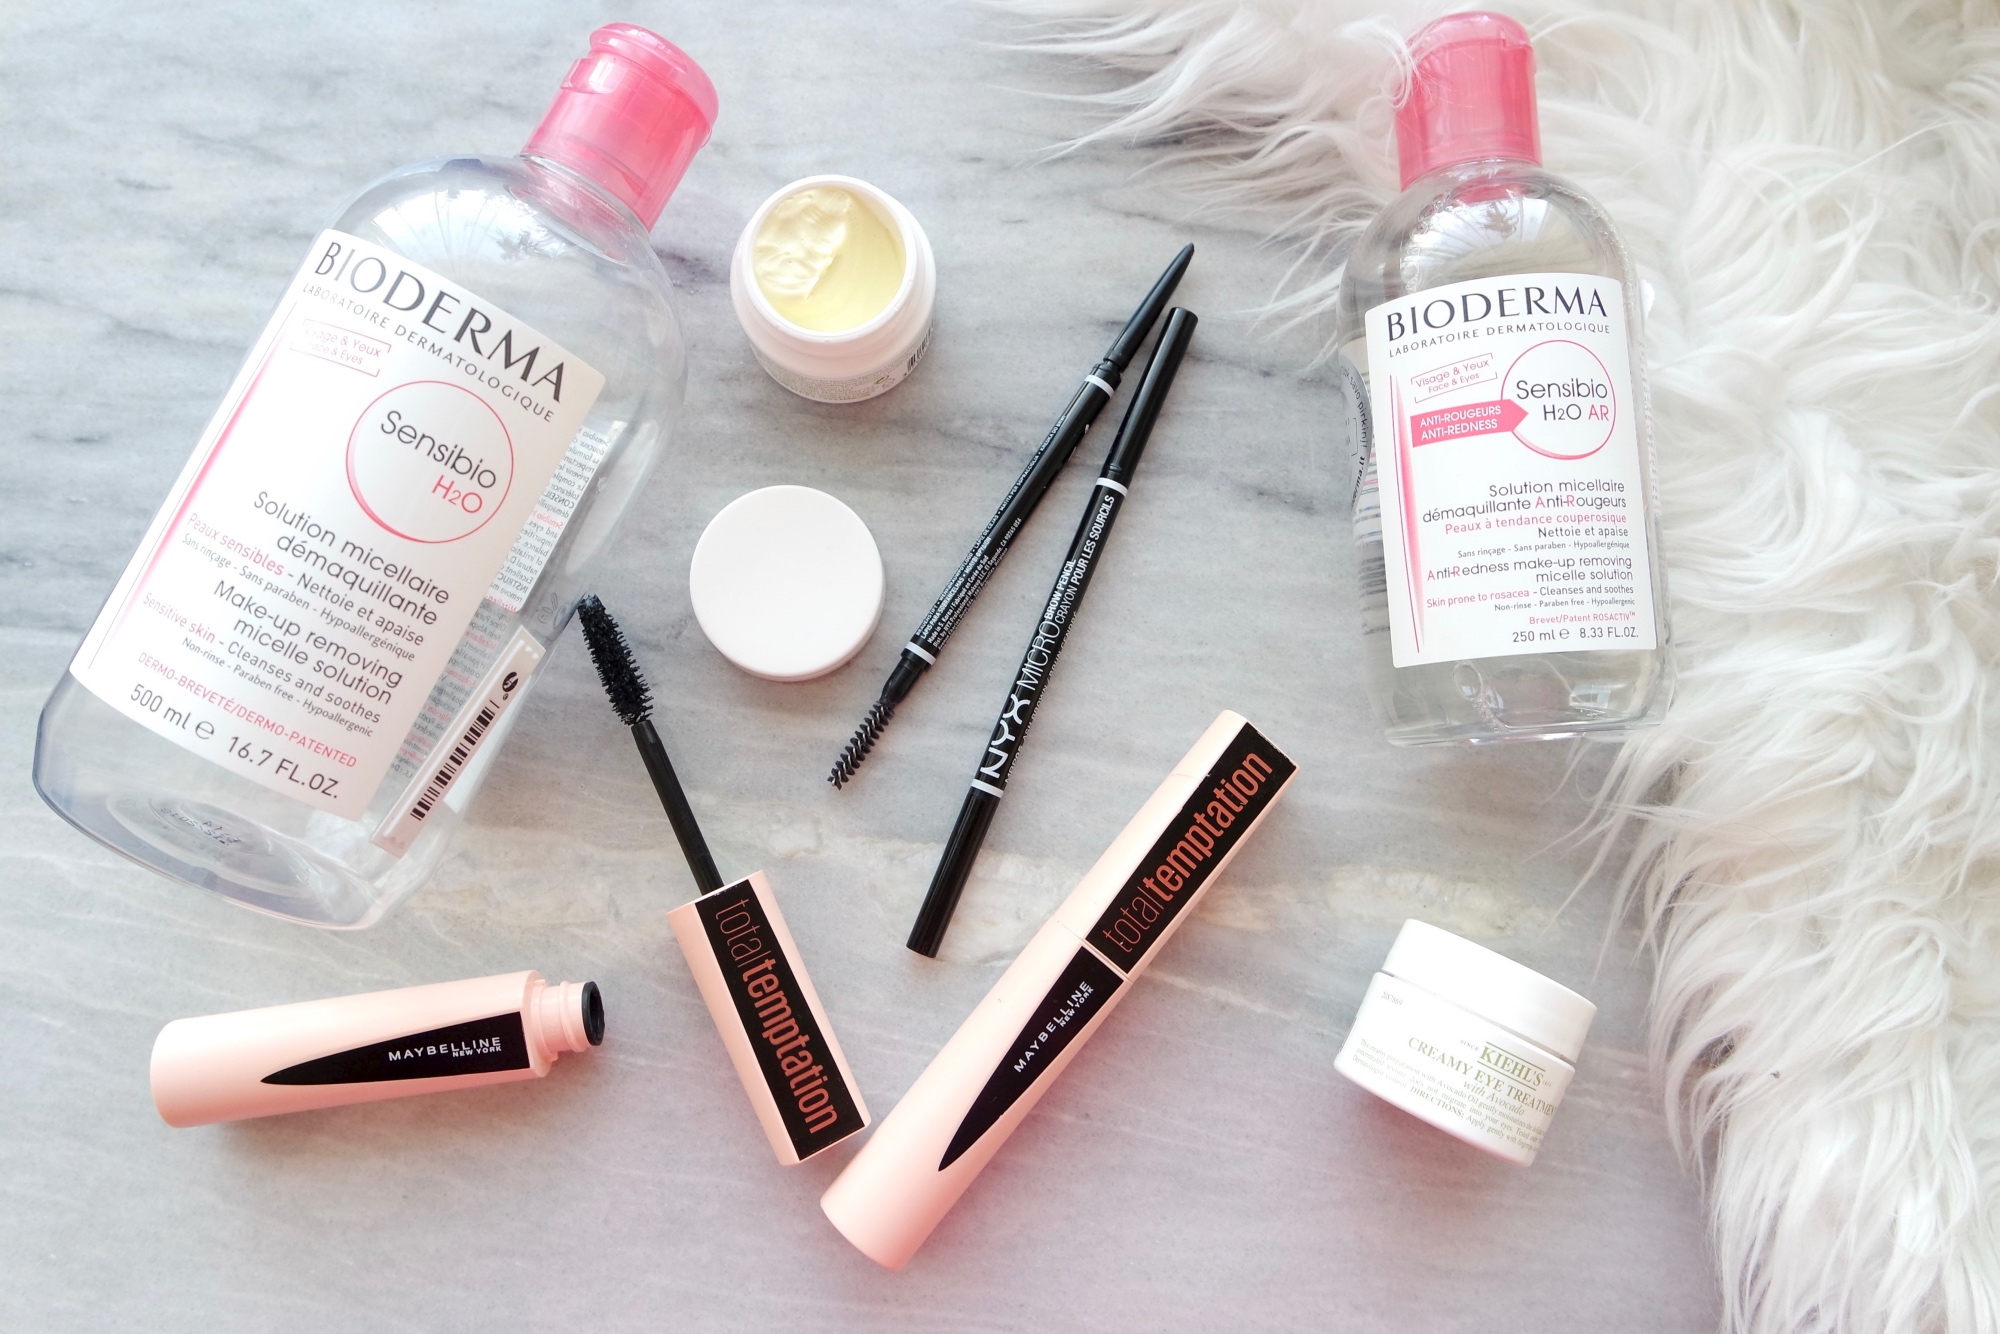 Products I keep repurchasing